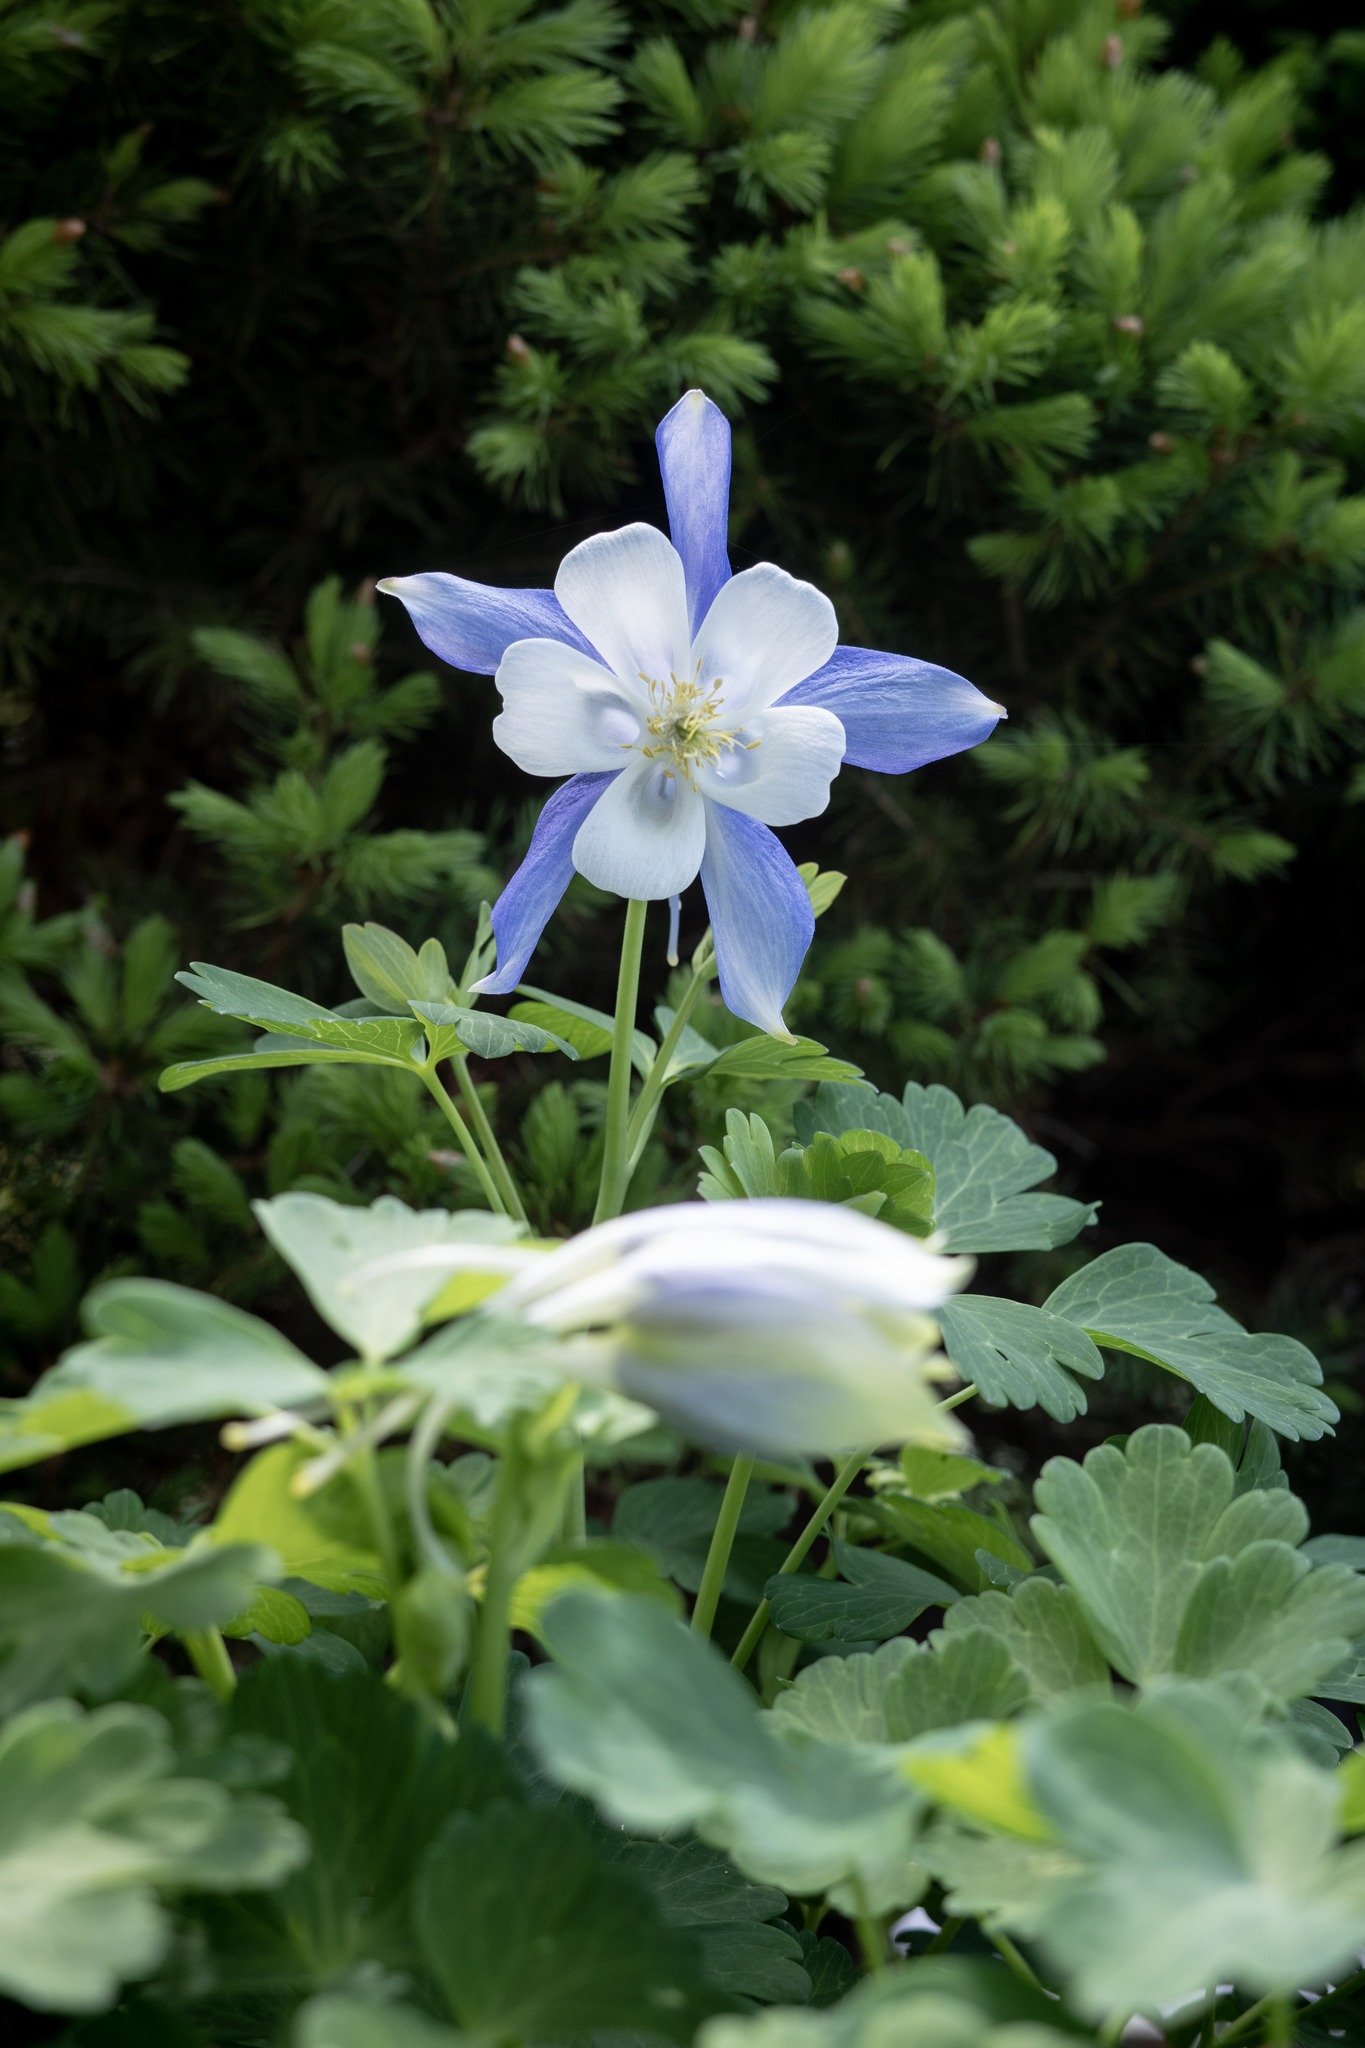 This picture-perfect Columbine was taking a break from feeding the  hummingbirds to quickly pose for me! Great for all of the pollinators in your garden - and the deer seem to dislike it!